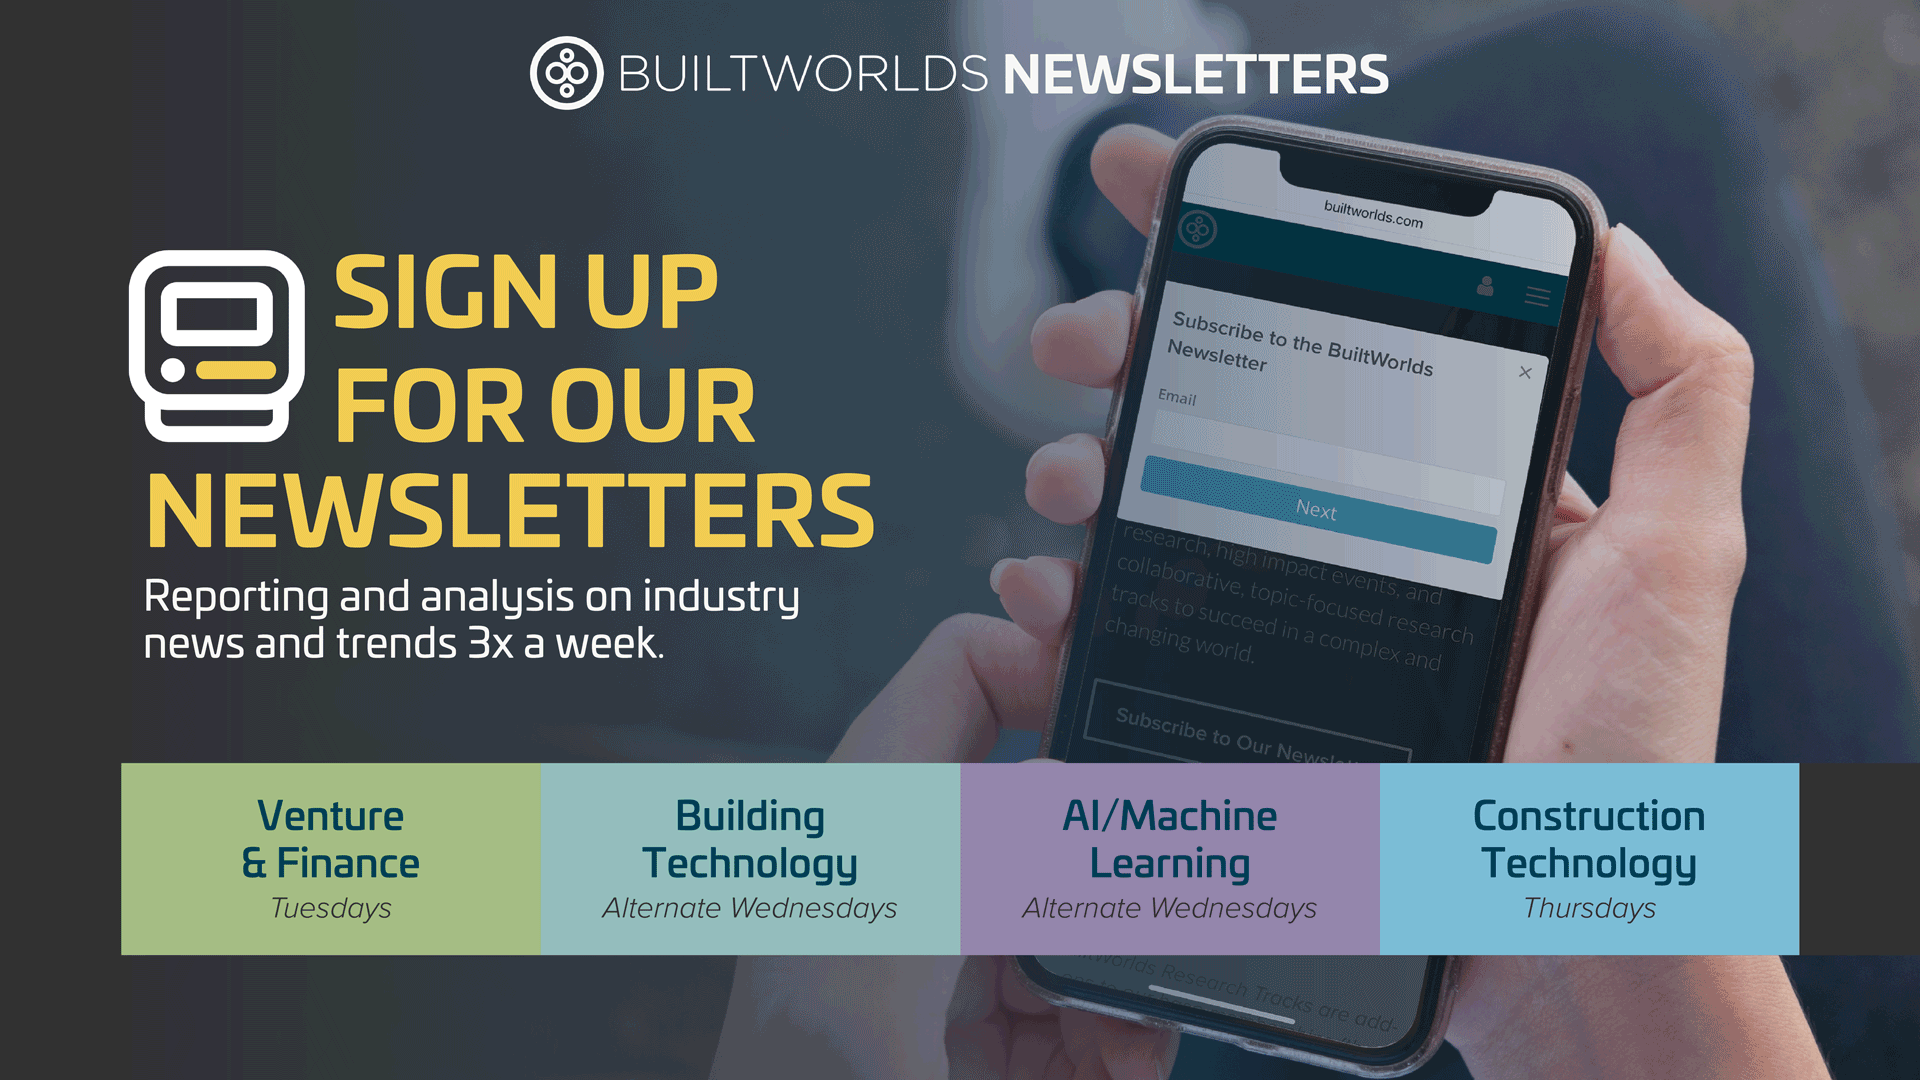 Sign up for our newsletters